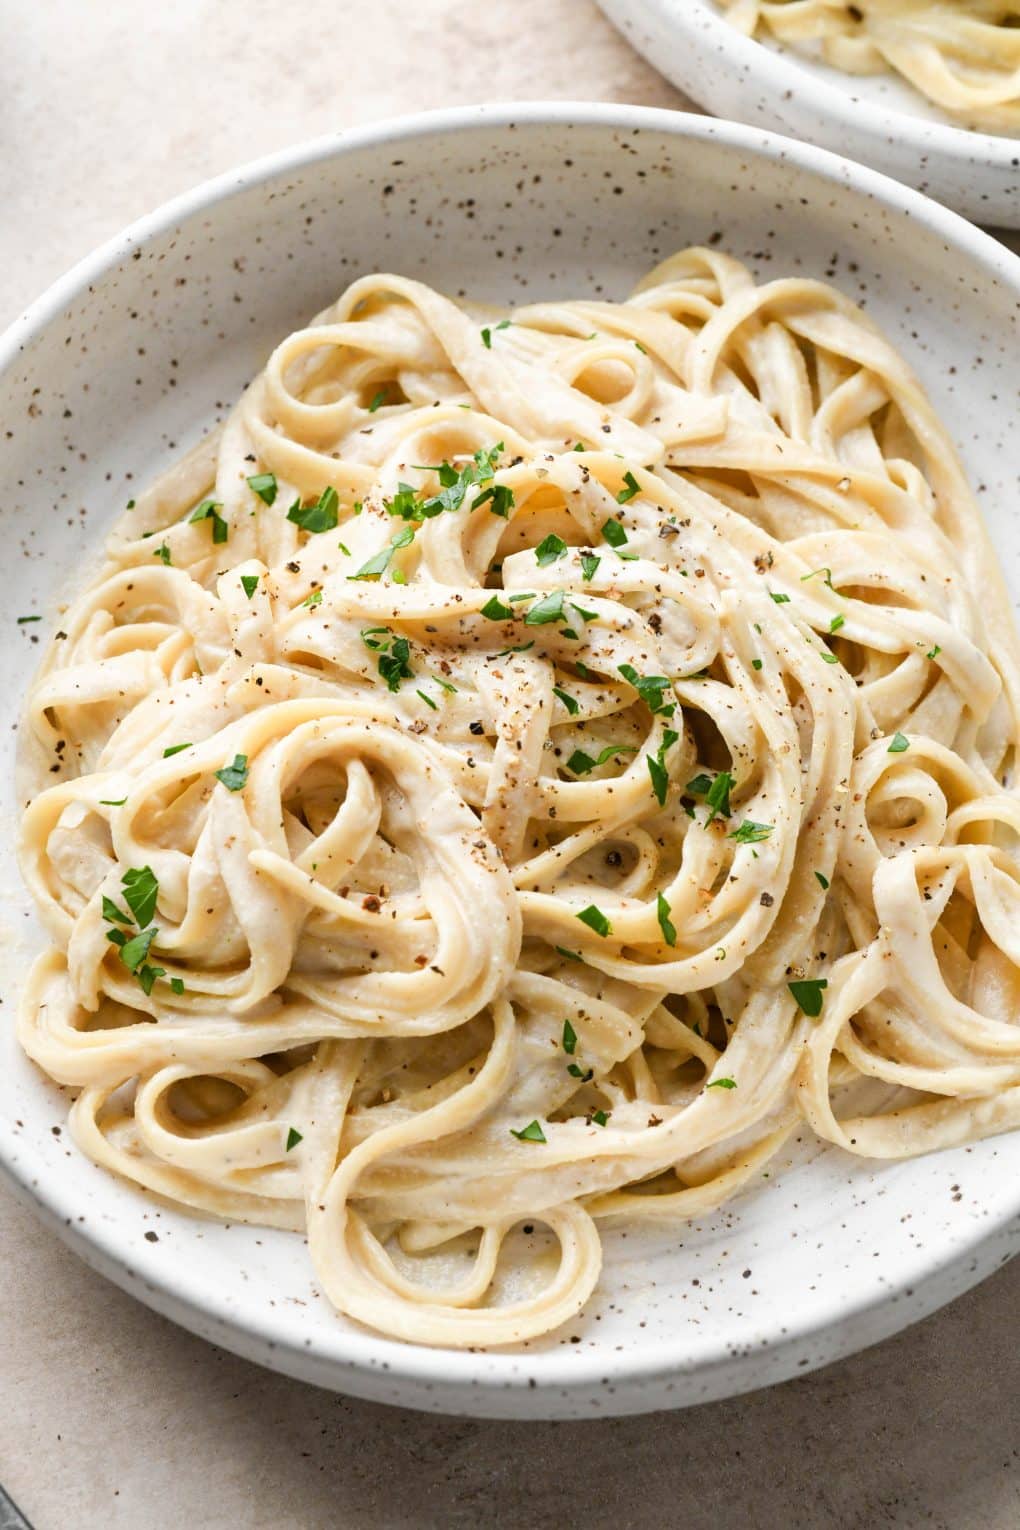 A bowl of dairy free fettuccine alfredo on a light brown colored background. Topped with black pepper and fresh herbs.